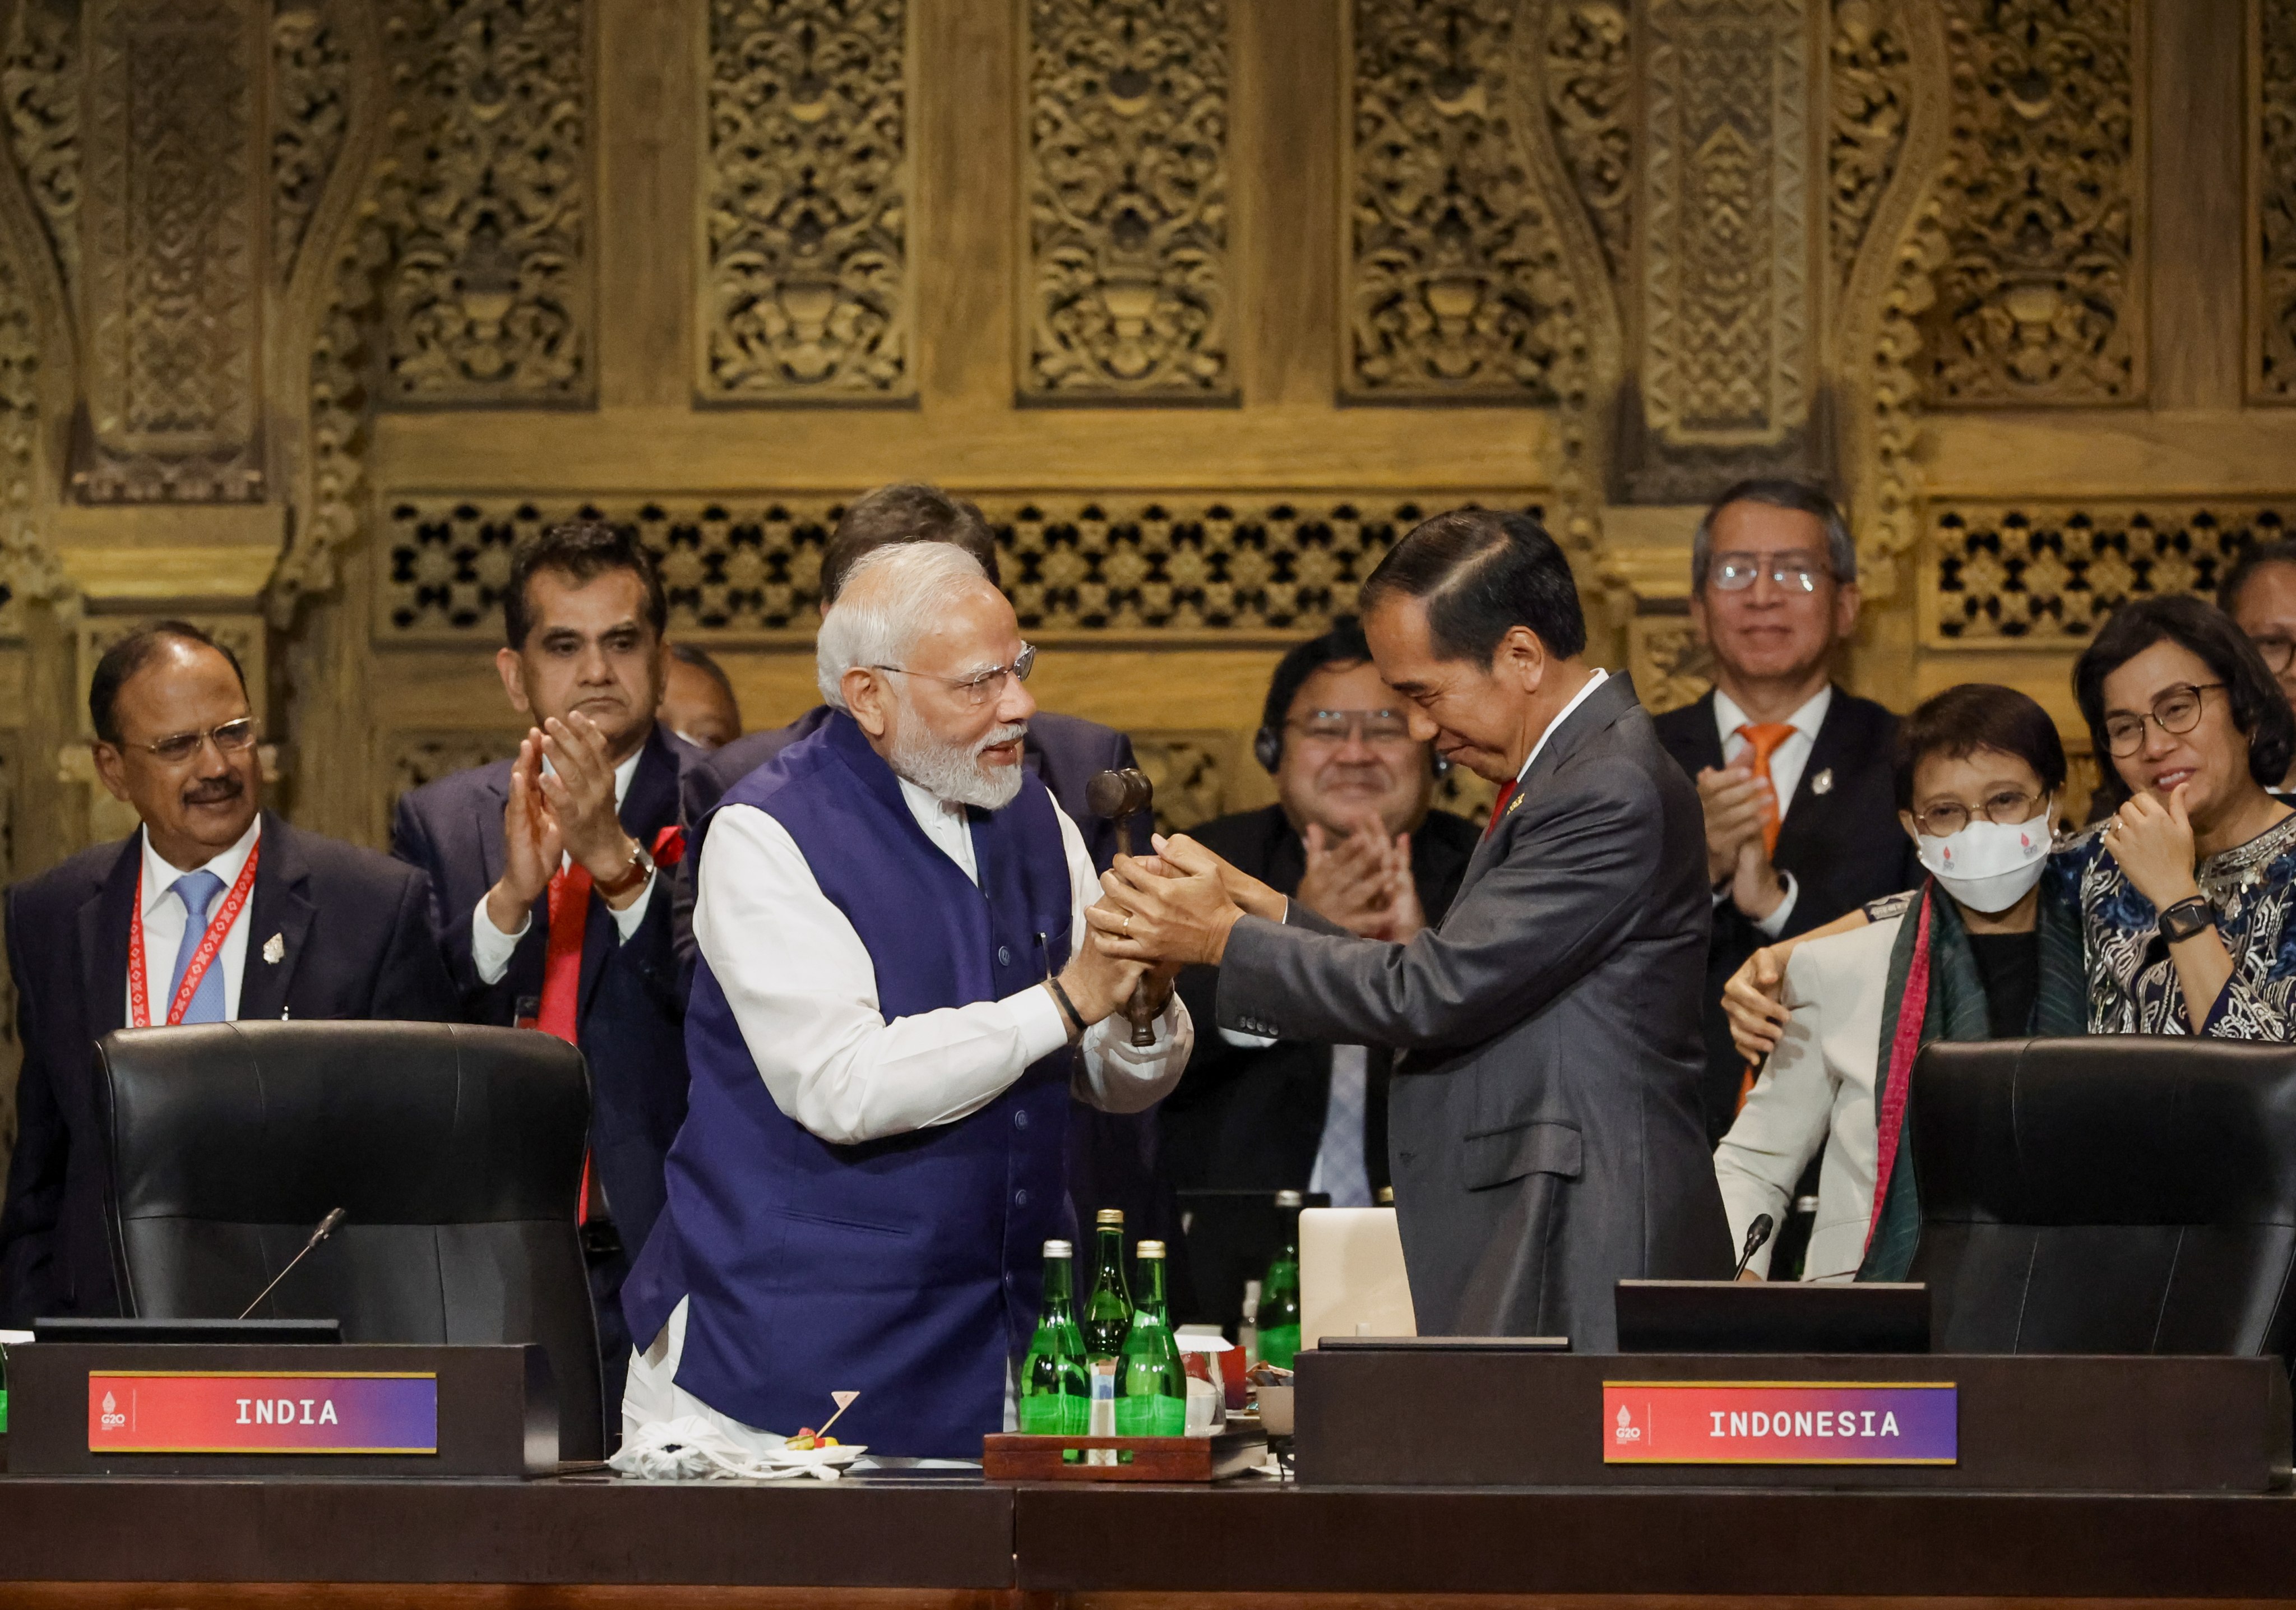 Indonesian President Joko Widodo (right) passes the gavel to Indian Prime Minister Narendra Modi in a handover ceremony during the Group of 20 Leaders’ Summit in Bali, Indonesia, on November 16. India begins its G20 presidency on December 1. Photo: EPA-EFE